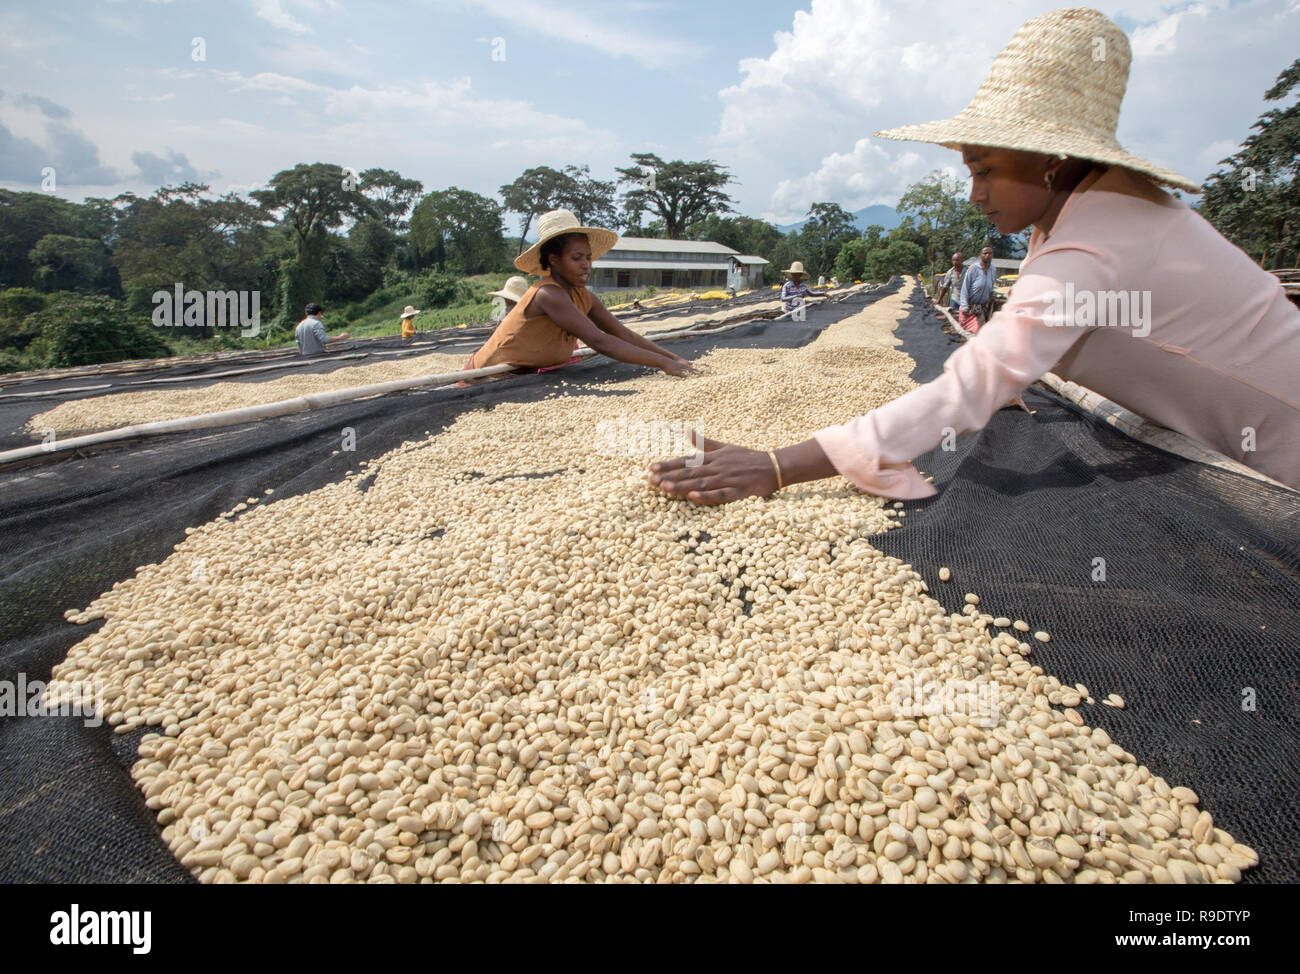 (181223) -- BEIJING, Dec. 23, 2018 (Xinhua) -- Workers dry washed coffee beans at a coffee farm near Kaffa, Ethiopia, Dec. 8, 2018. The local coffee farms meet busy season in December every year. Coffee rooted in Ethiopia is the raw material of various coffee drinks favored by people all over the world. It is said that coffee was discovered by sheepherder in Kaffa, southwestern in Ethiopia, from which the name of coffee evolved. Coffee beans from Ethiopia are exported to China mainly by sea. Hulled green coffee beans are transported to Port of Djibouti by road and railway and then after Stock Photo